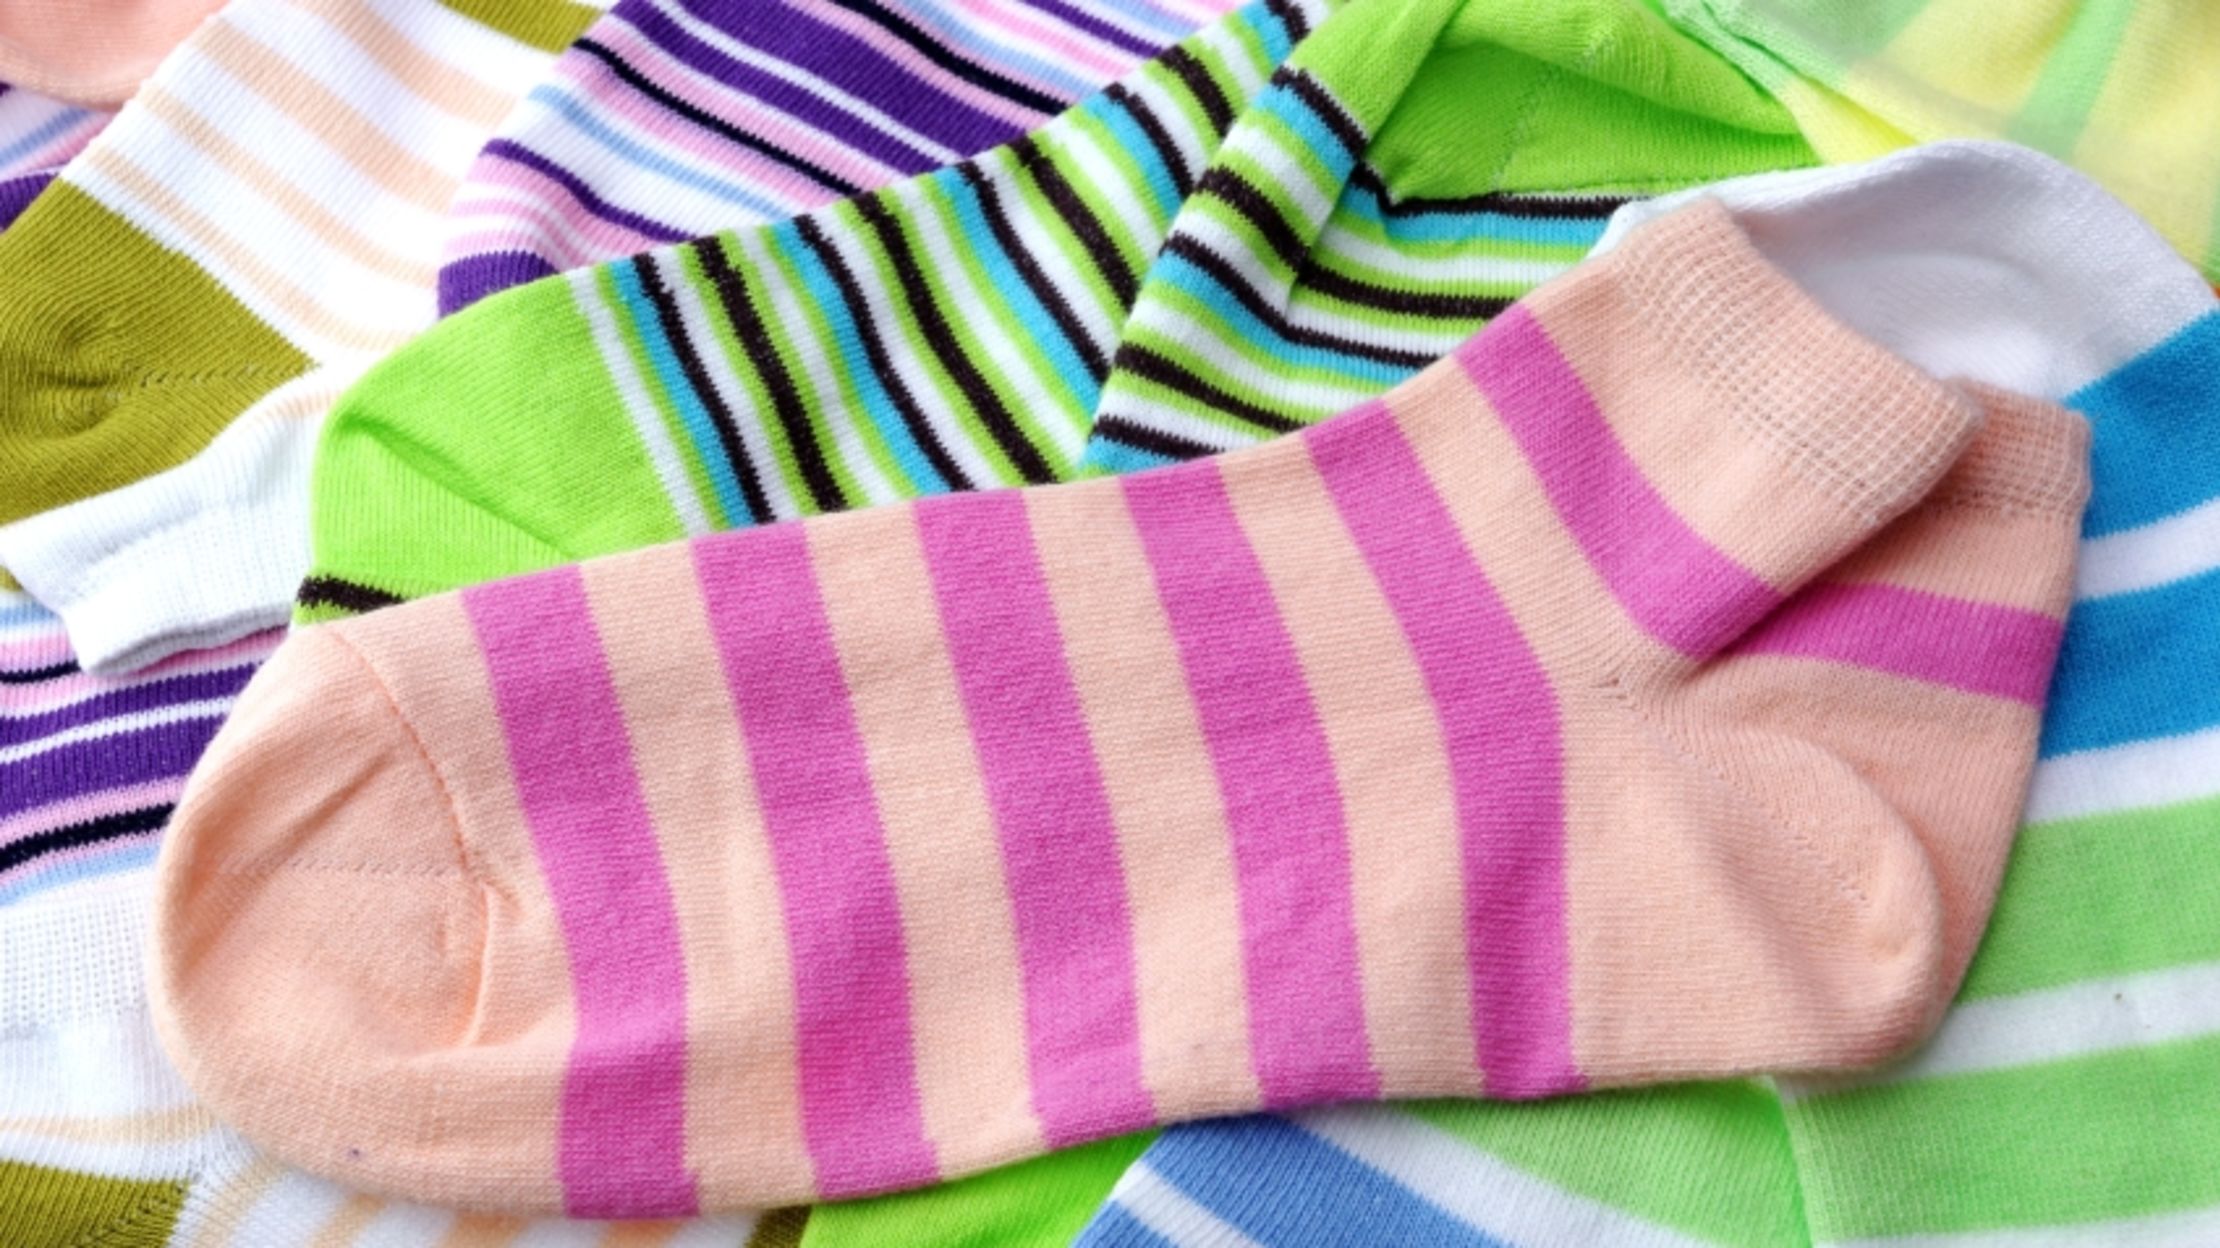 15 Brilliant Ways To Use Socks That Lost Their Mate Mental Floss